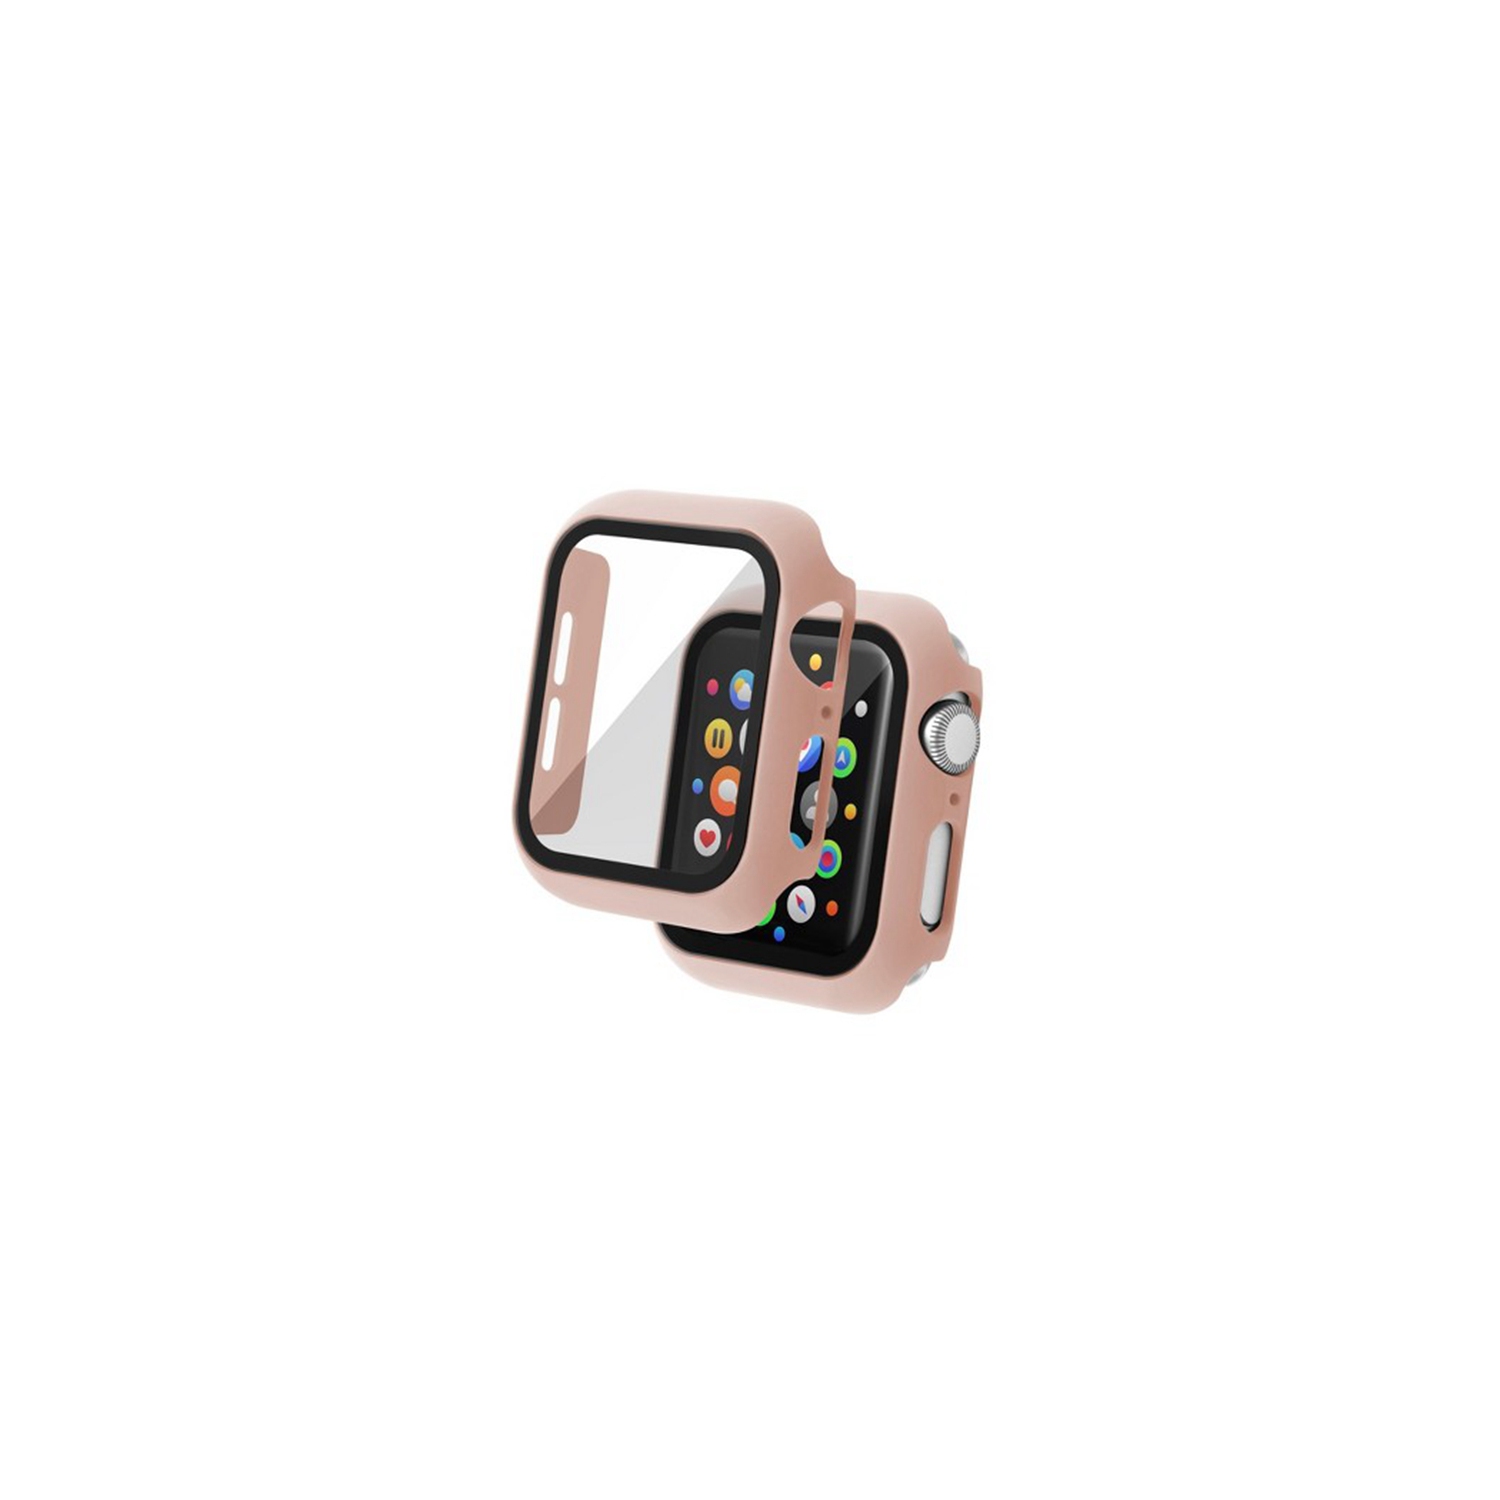 Full Protective Rugged Case Cover & Tempered Glass Screen Protector for Apple Watch iWatch Series 1 2 3 4 5 6, 38mm, Rose Gold